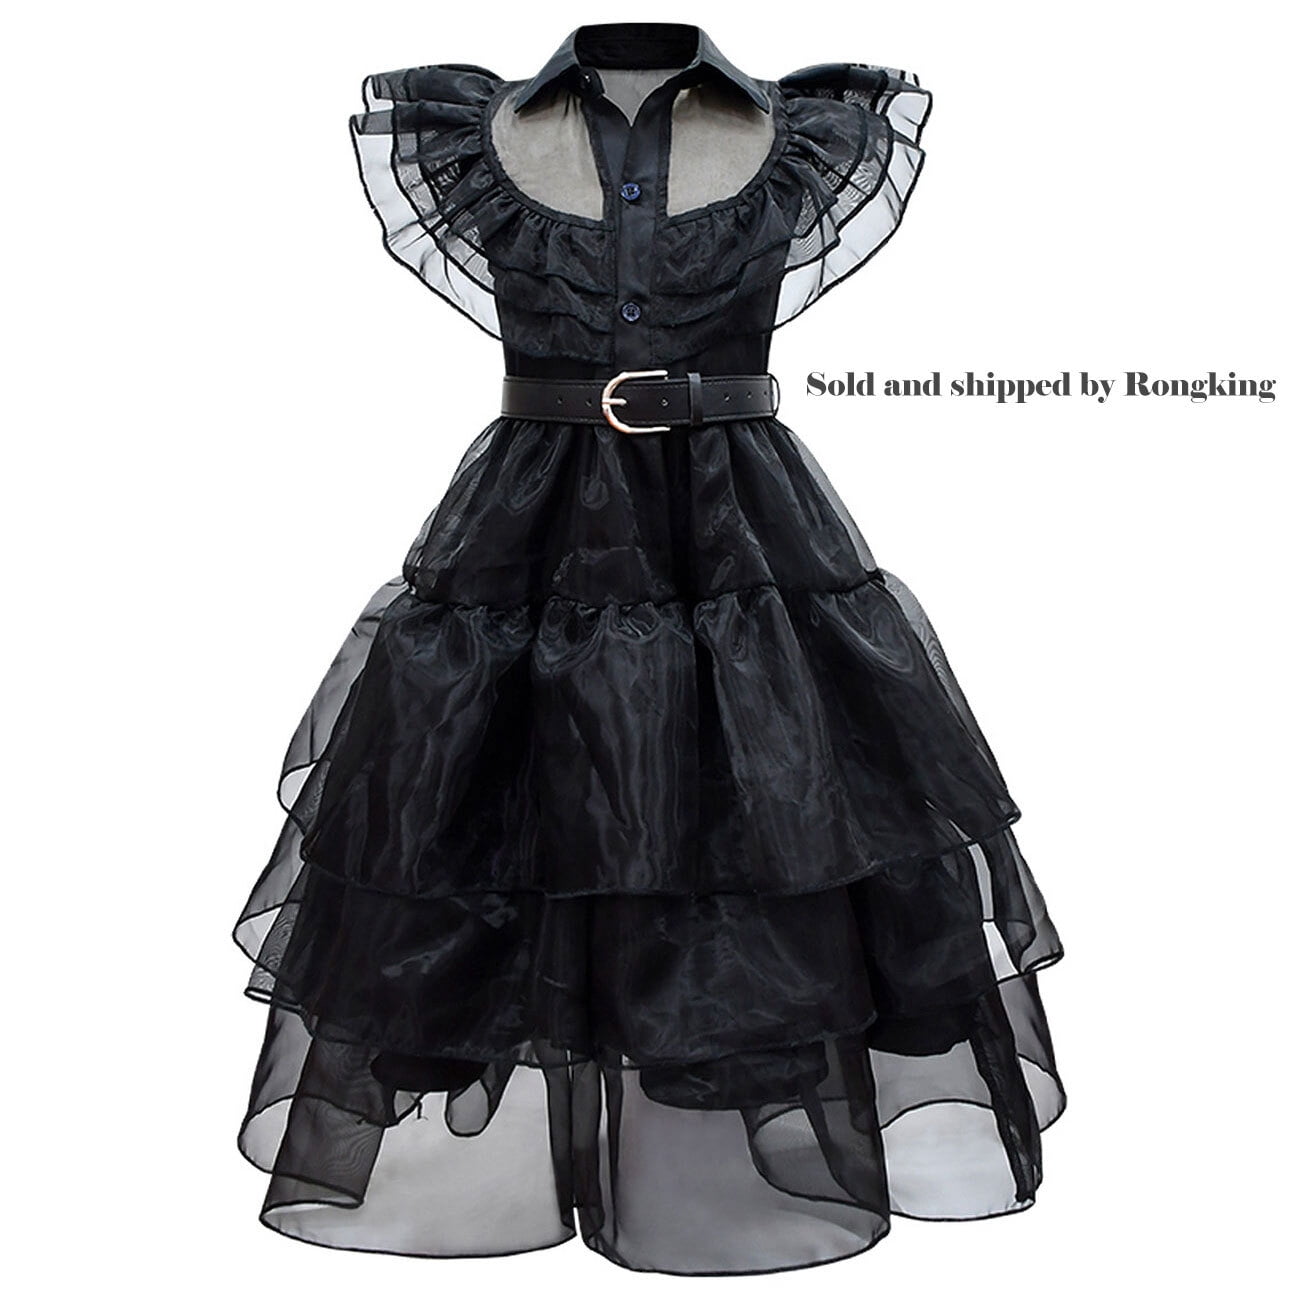 Wednesday Dress for Girls Kids Addams Family Cosplay Costume Outfit